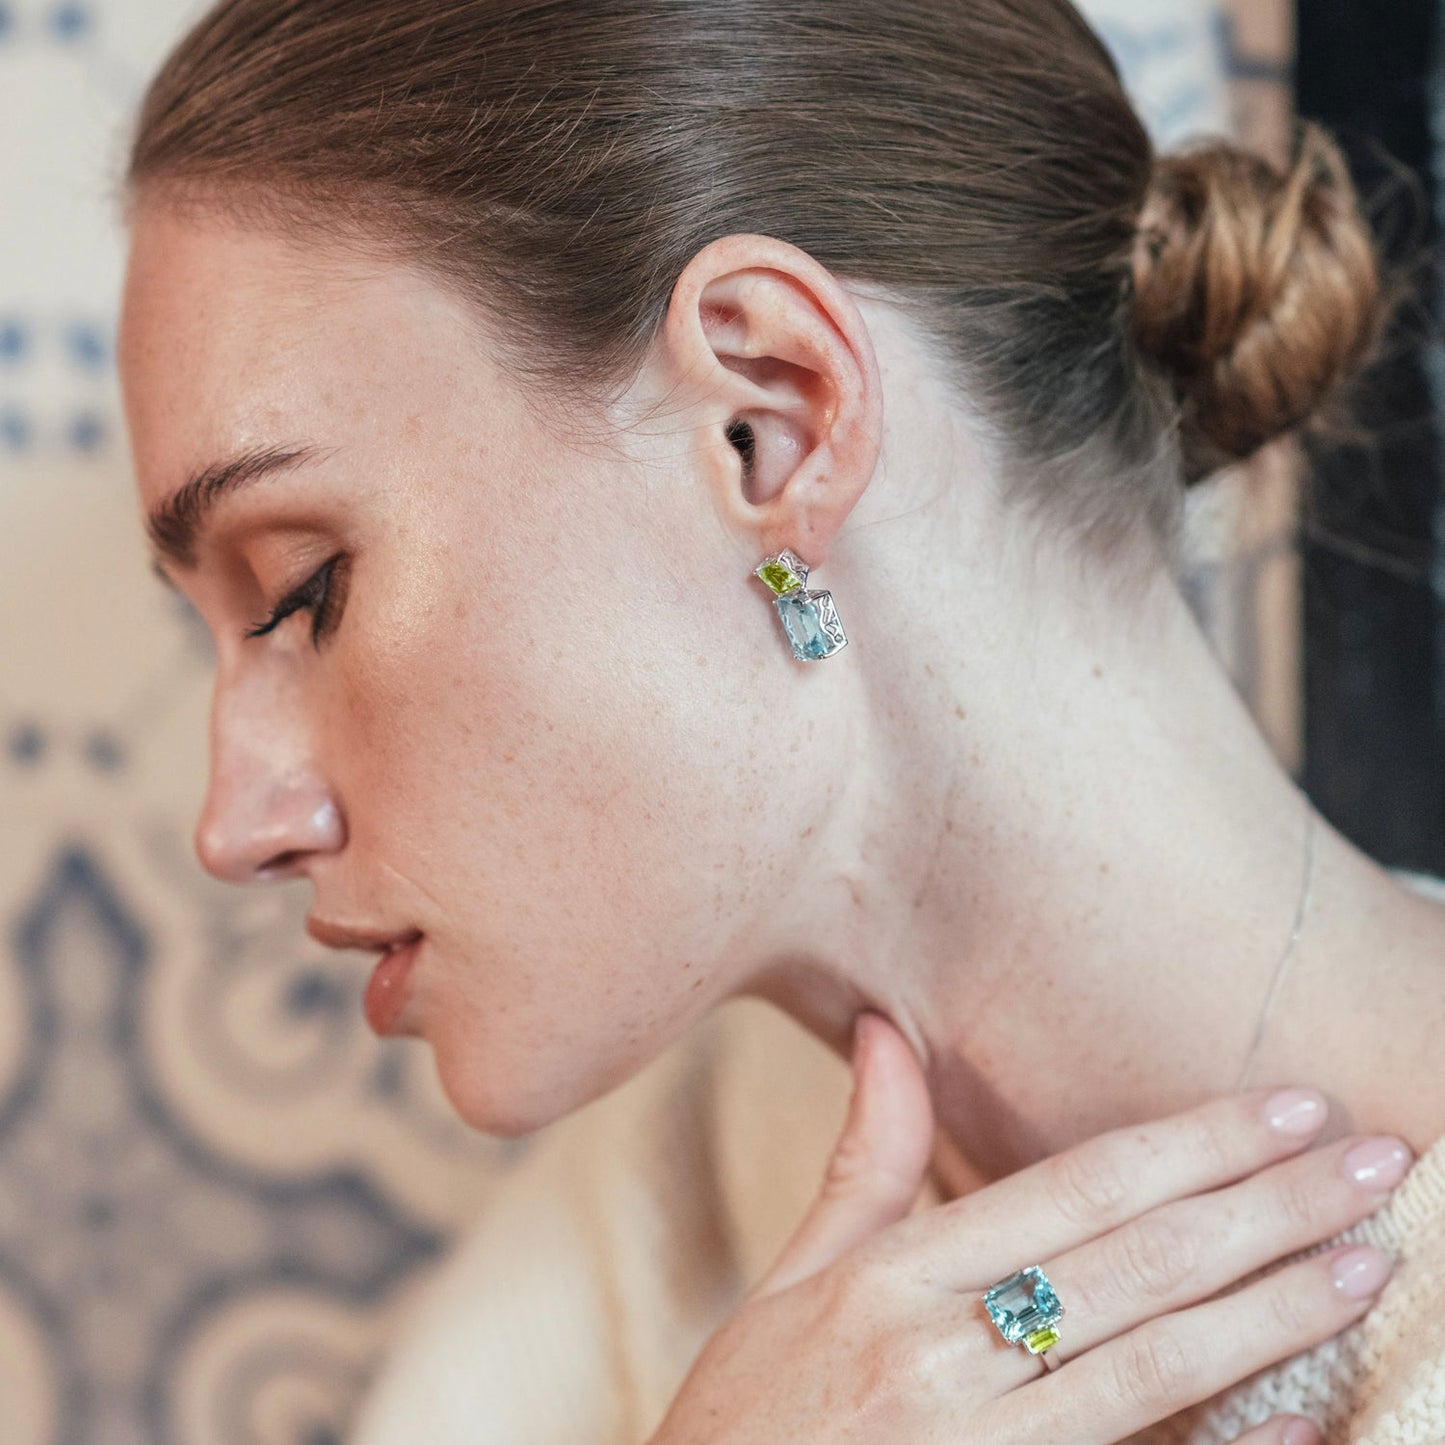 Load image into Gallery viewer, London-made luxury custom gold jewellery – Model demonstrating the wear of the 9ct Yellow Gold Octagon Ring in Peridot and Blue Topaz and the 9ct Yellow Gold Octagon Gold Drop Earrings in Peridot and Blue Topaz – Andalusian Collection, Augustine Jewellery, British Jewellers, Gemstone Jewellery, Luxury Jewellery London.
